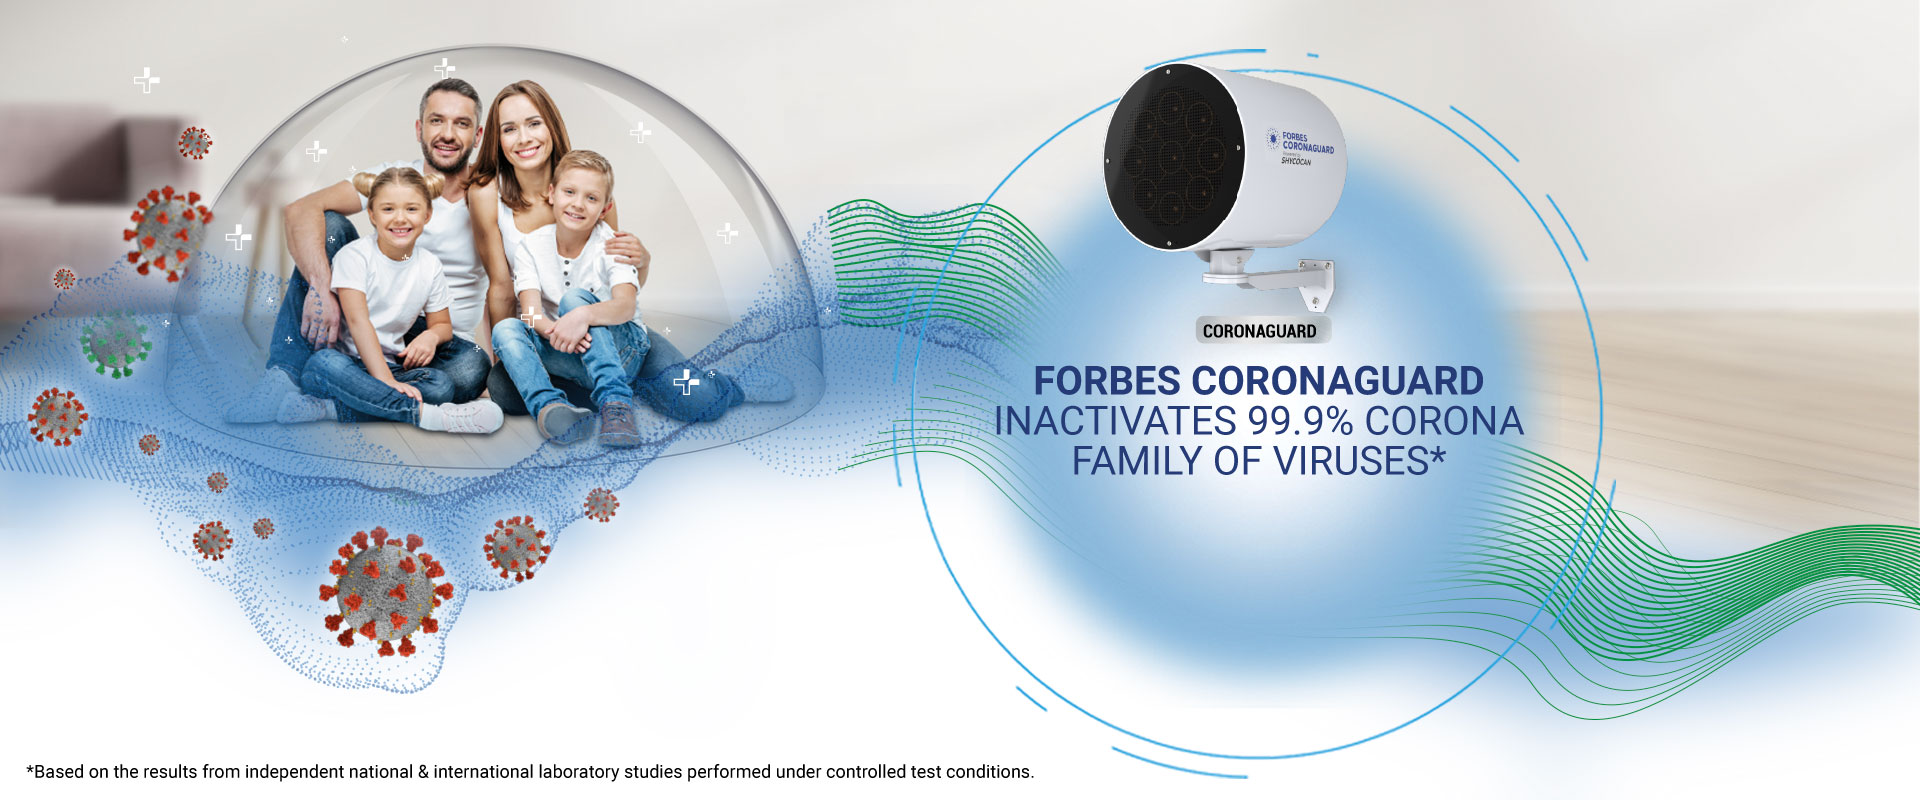 FORBES  CORONAGUARD. INACTIVATES 99.9% CORONA FAMILY OF VIRUSES*. *Based on the results from independent national & international laboratory studies performed under controlled test conditions.